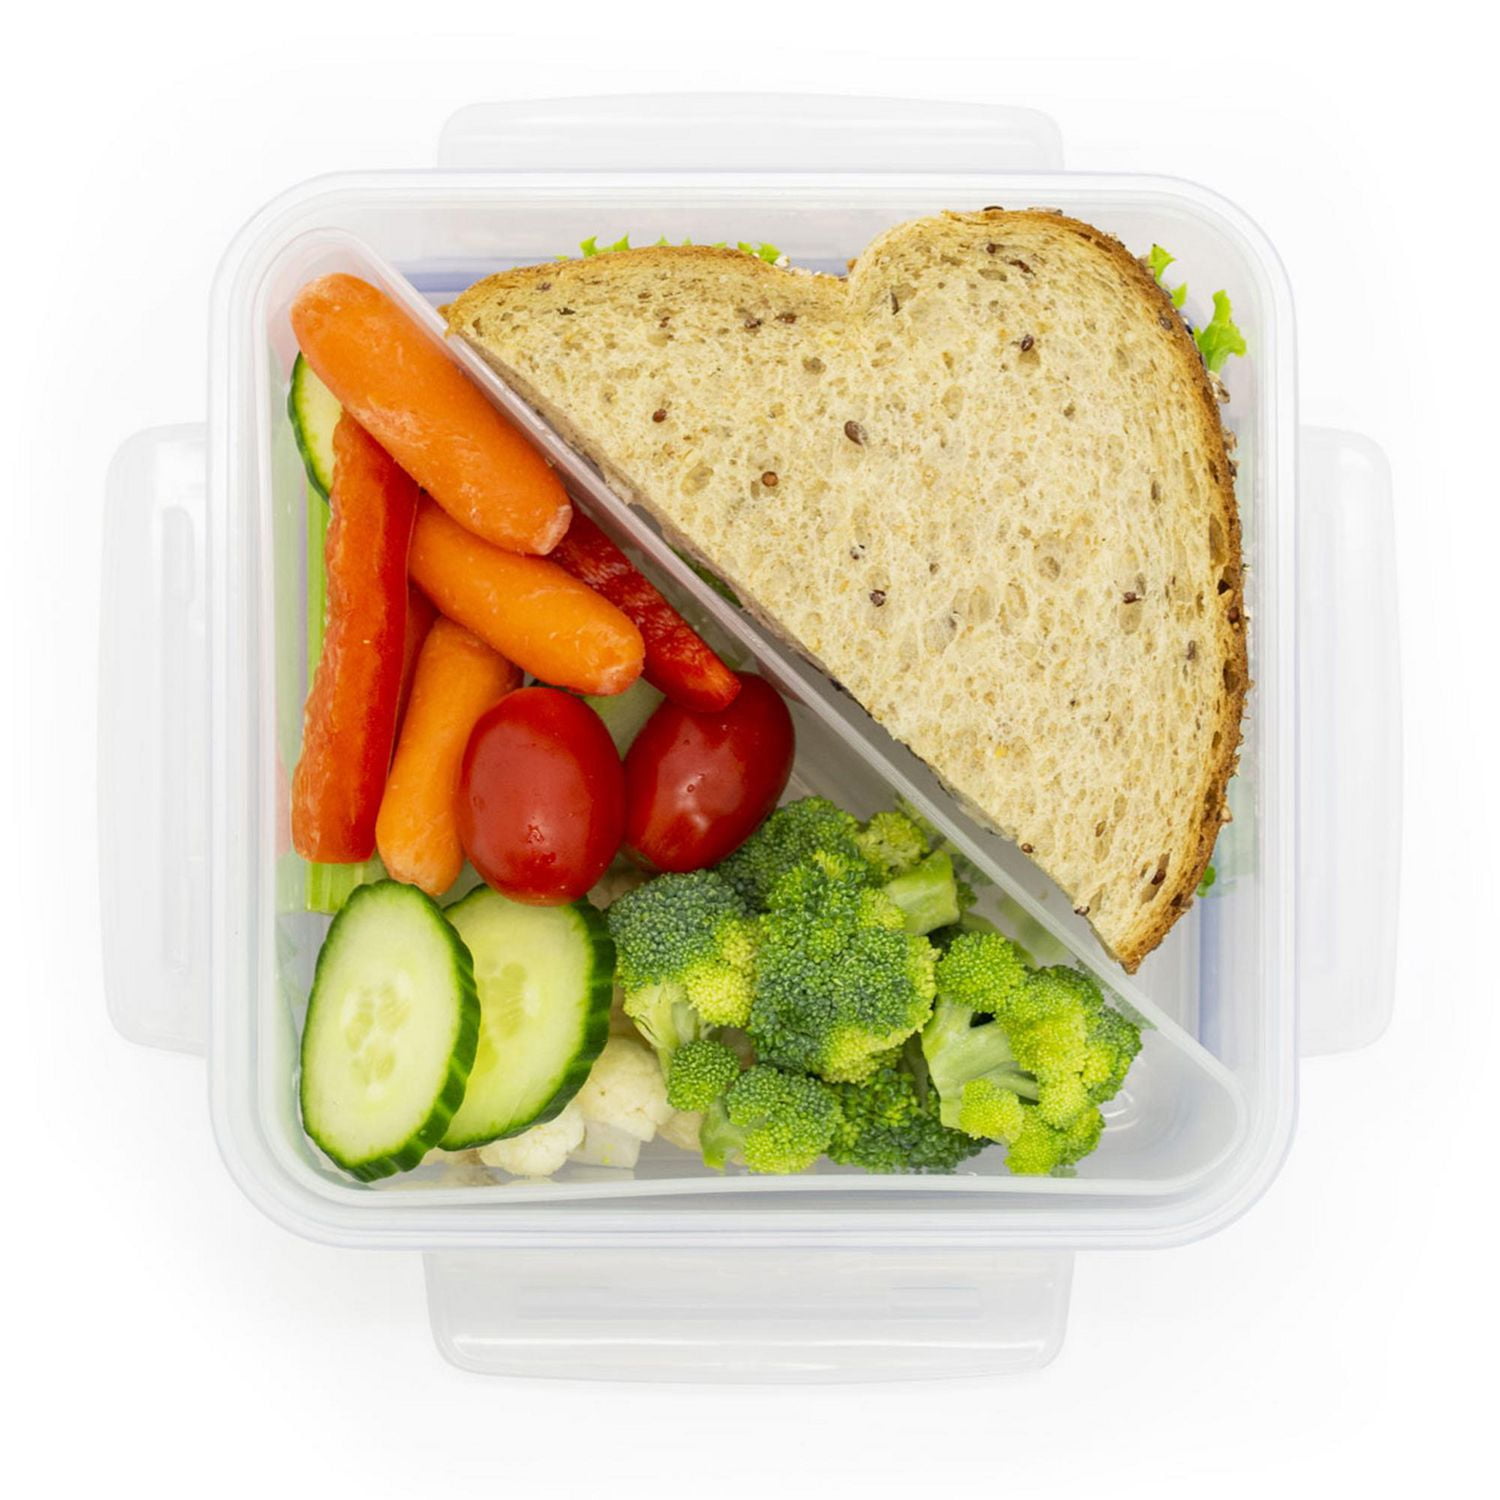 Starfrit LocknLock Lunch 41 oz / 1.2 L Square Container with Divider,  Nestable and stackable